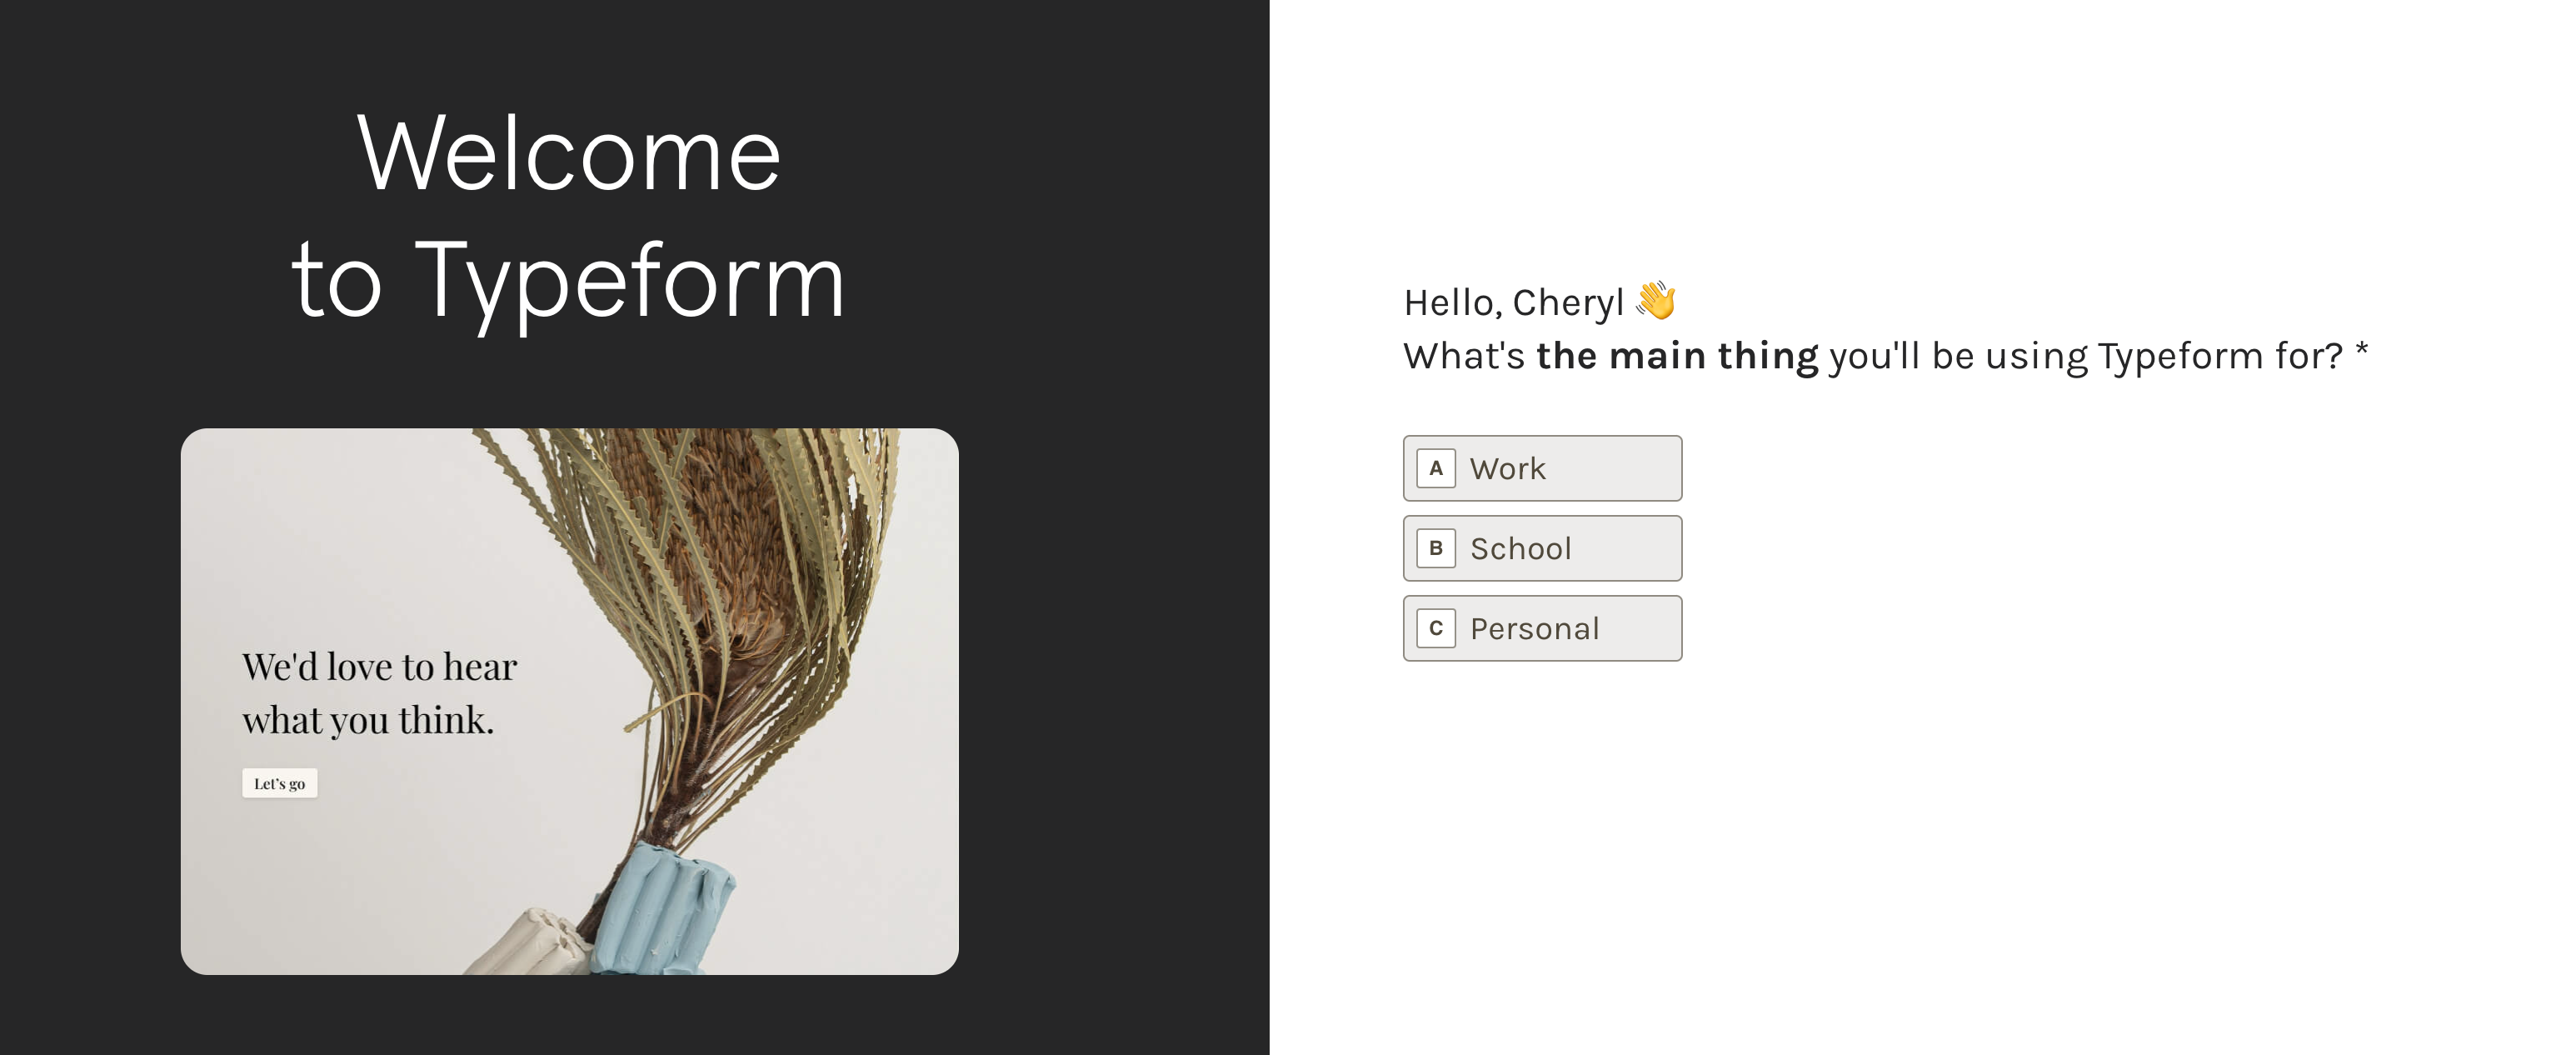 Typeform includes personalized welcome screens to bring new users onboard.